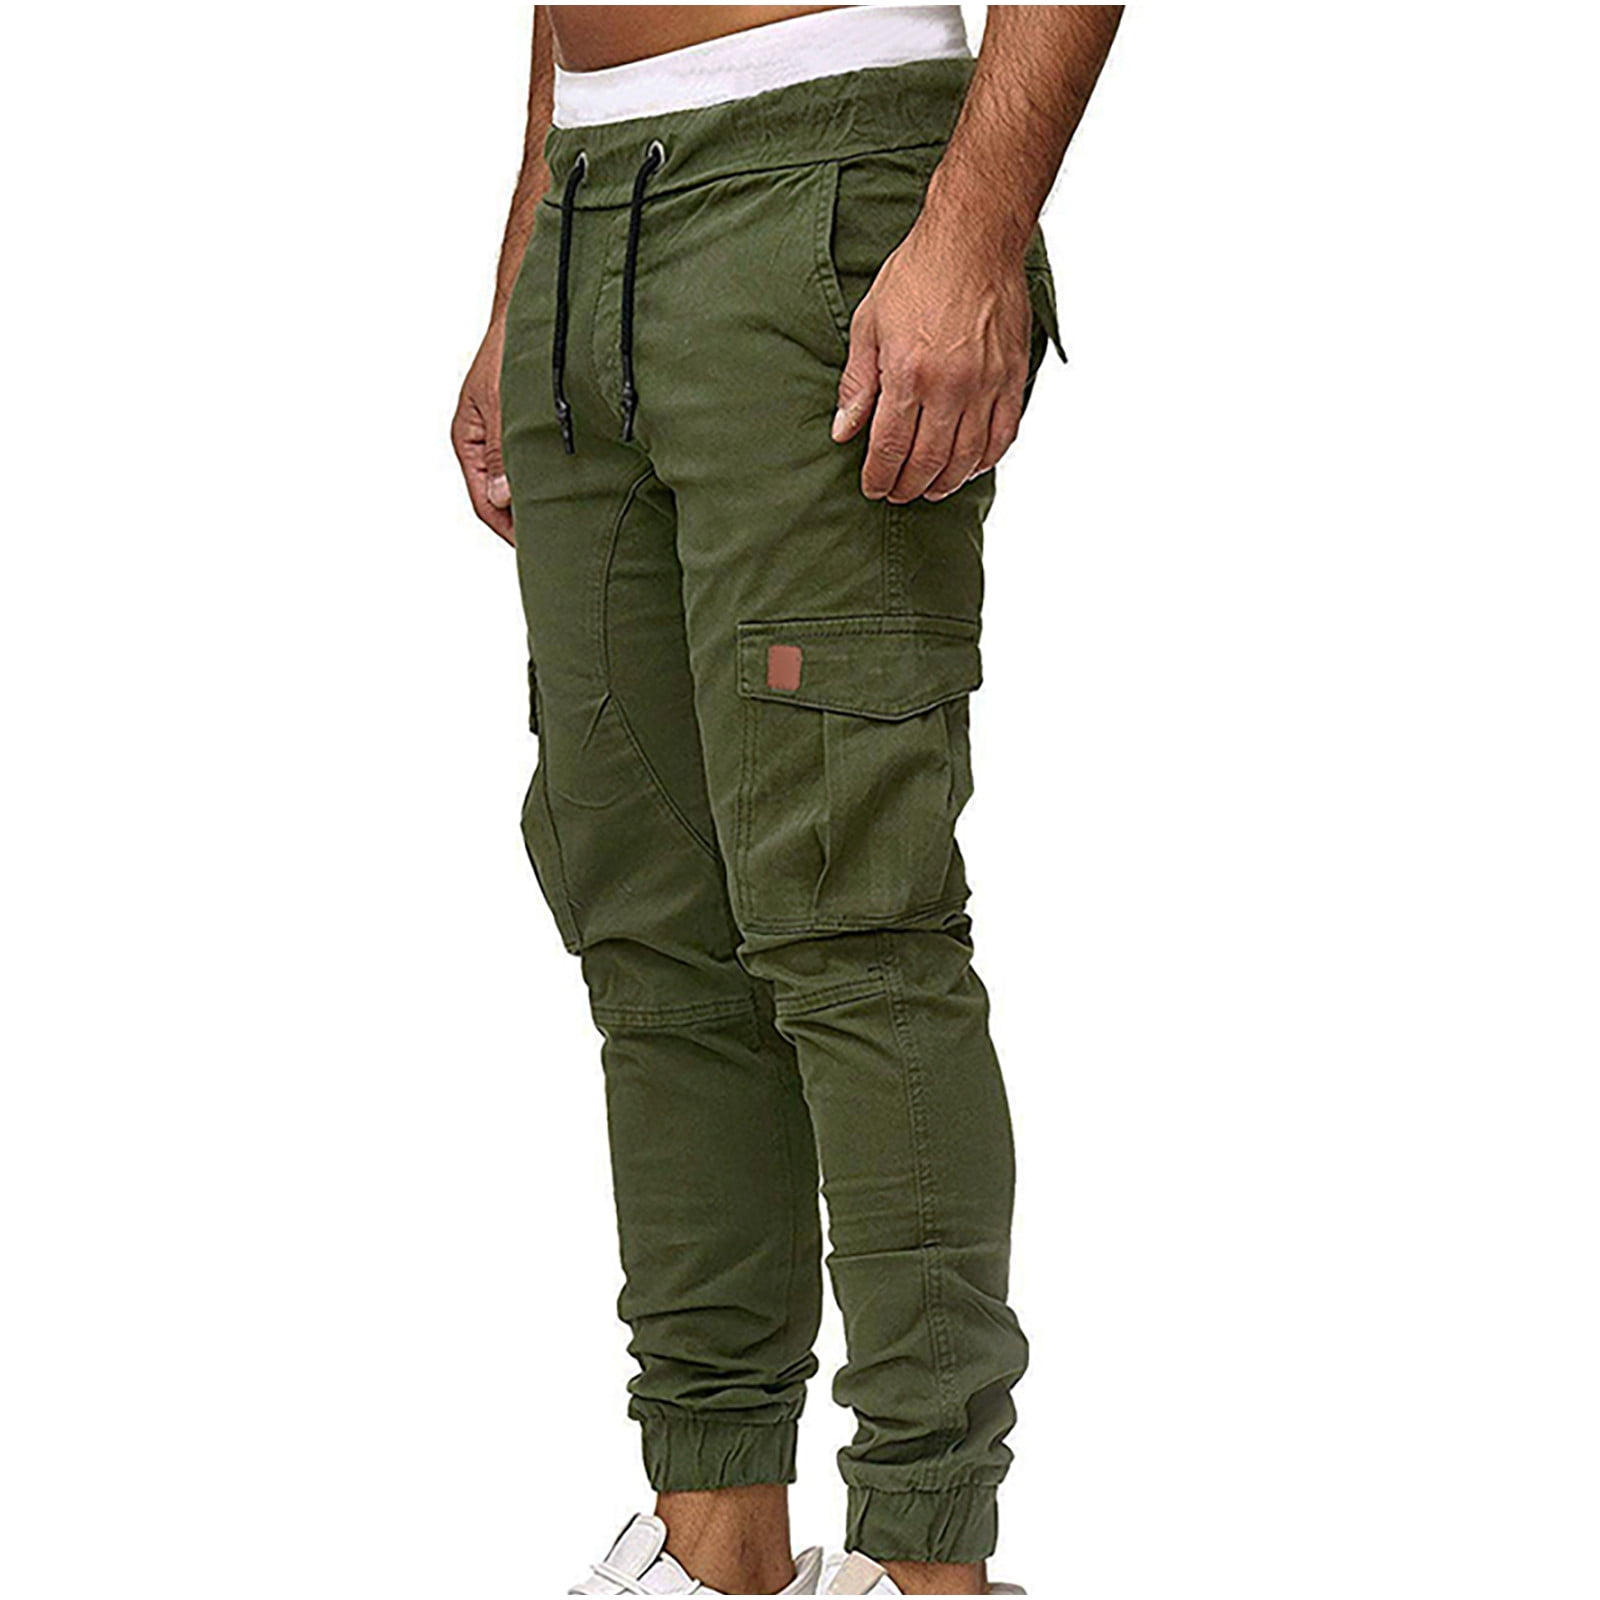 Clearance RYRJJ Mens Fashion Cargo Pants with Multi-Pockets Casual Cotton  Tapered Stretch Twill Drawstring Athletic Joggers Sweatpants(Khaki,XXL) 